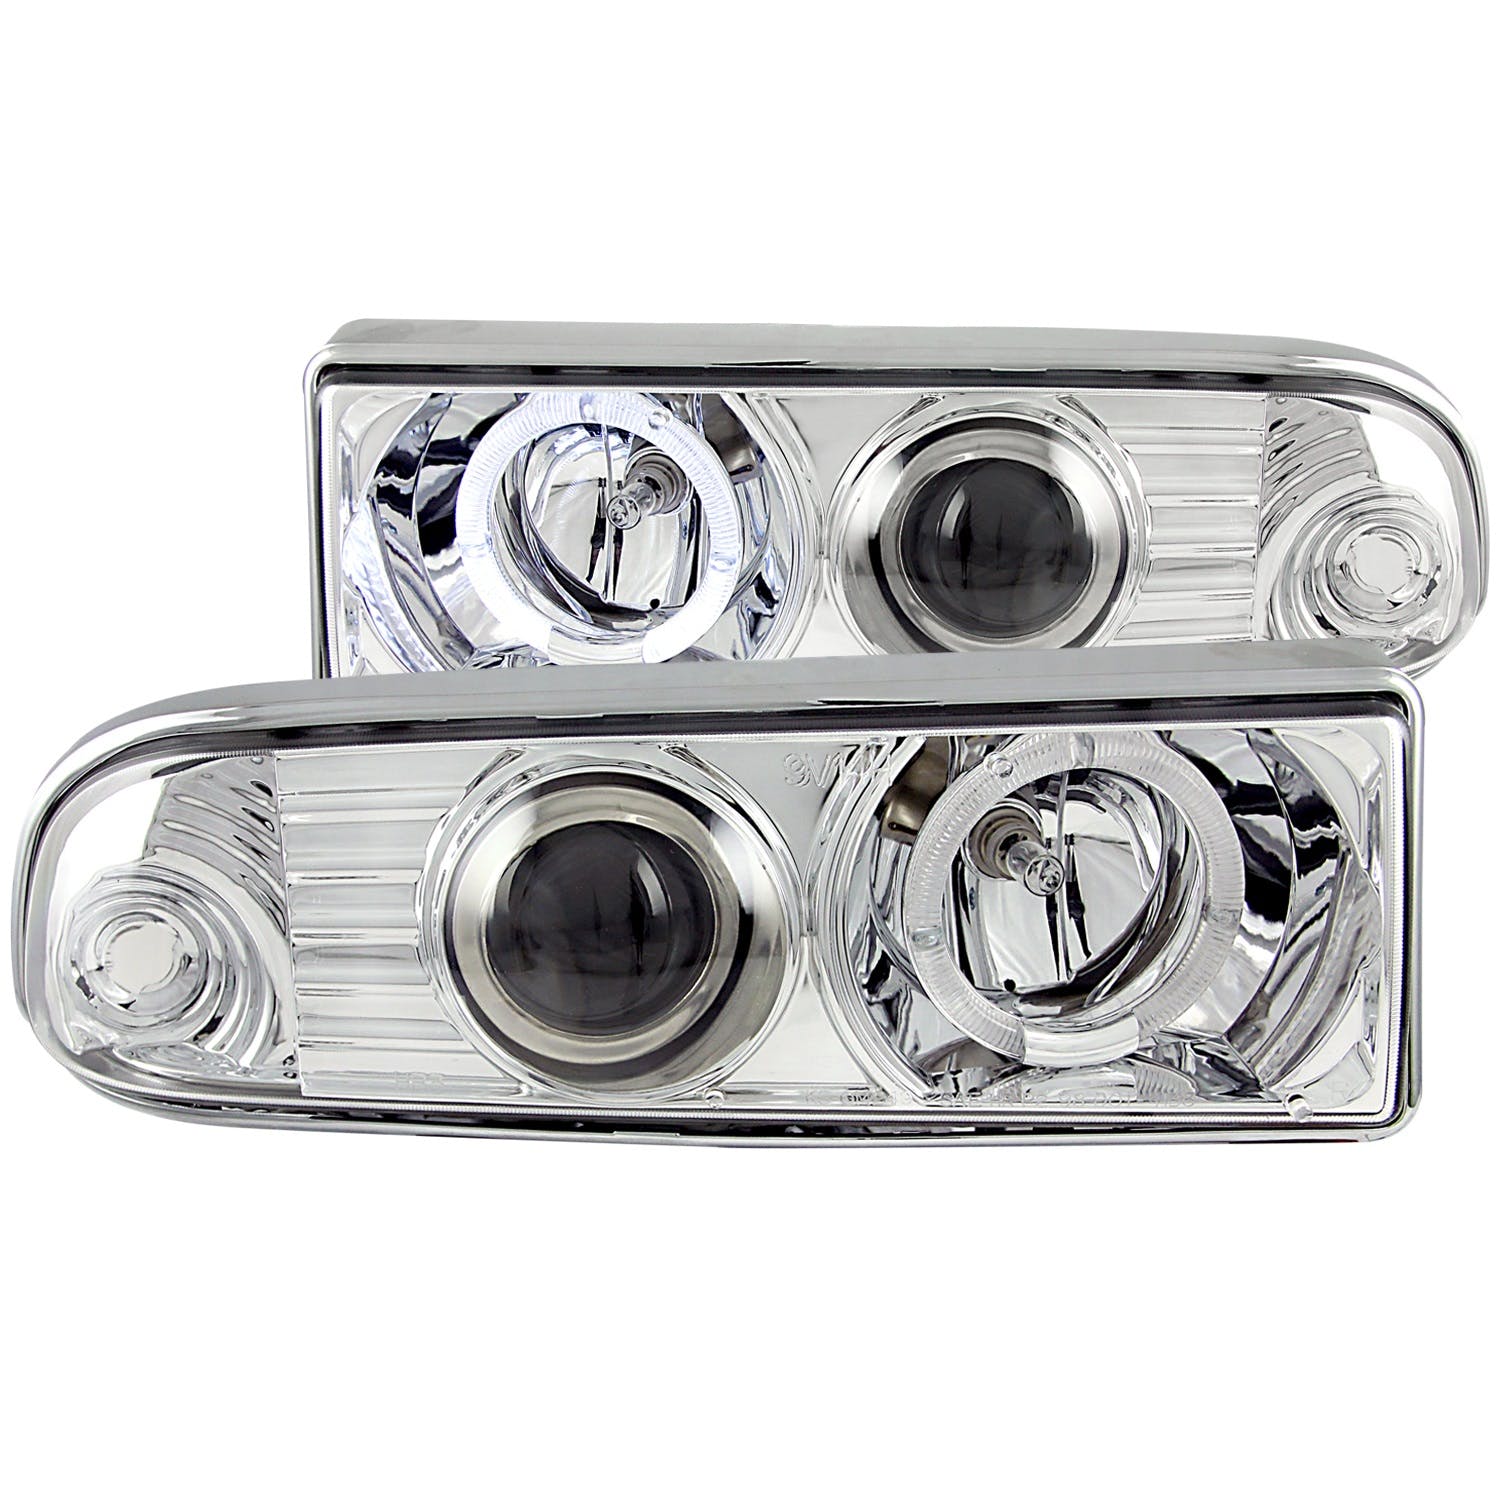 AnzoUSA 111016 Projector Headlights with Halo Chrome